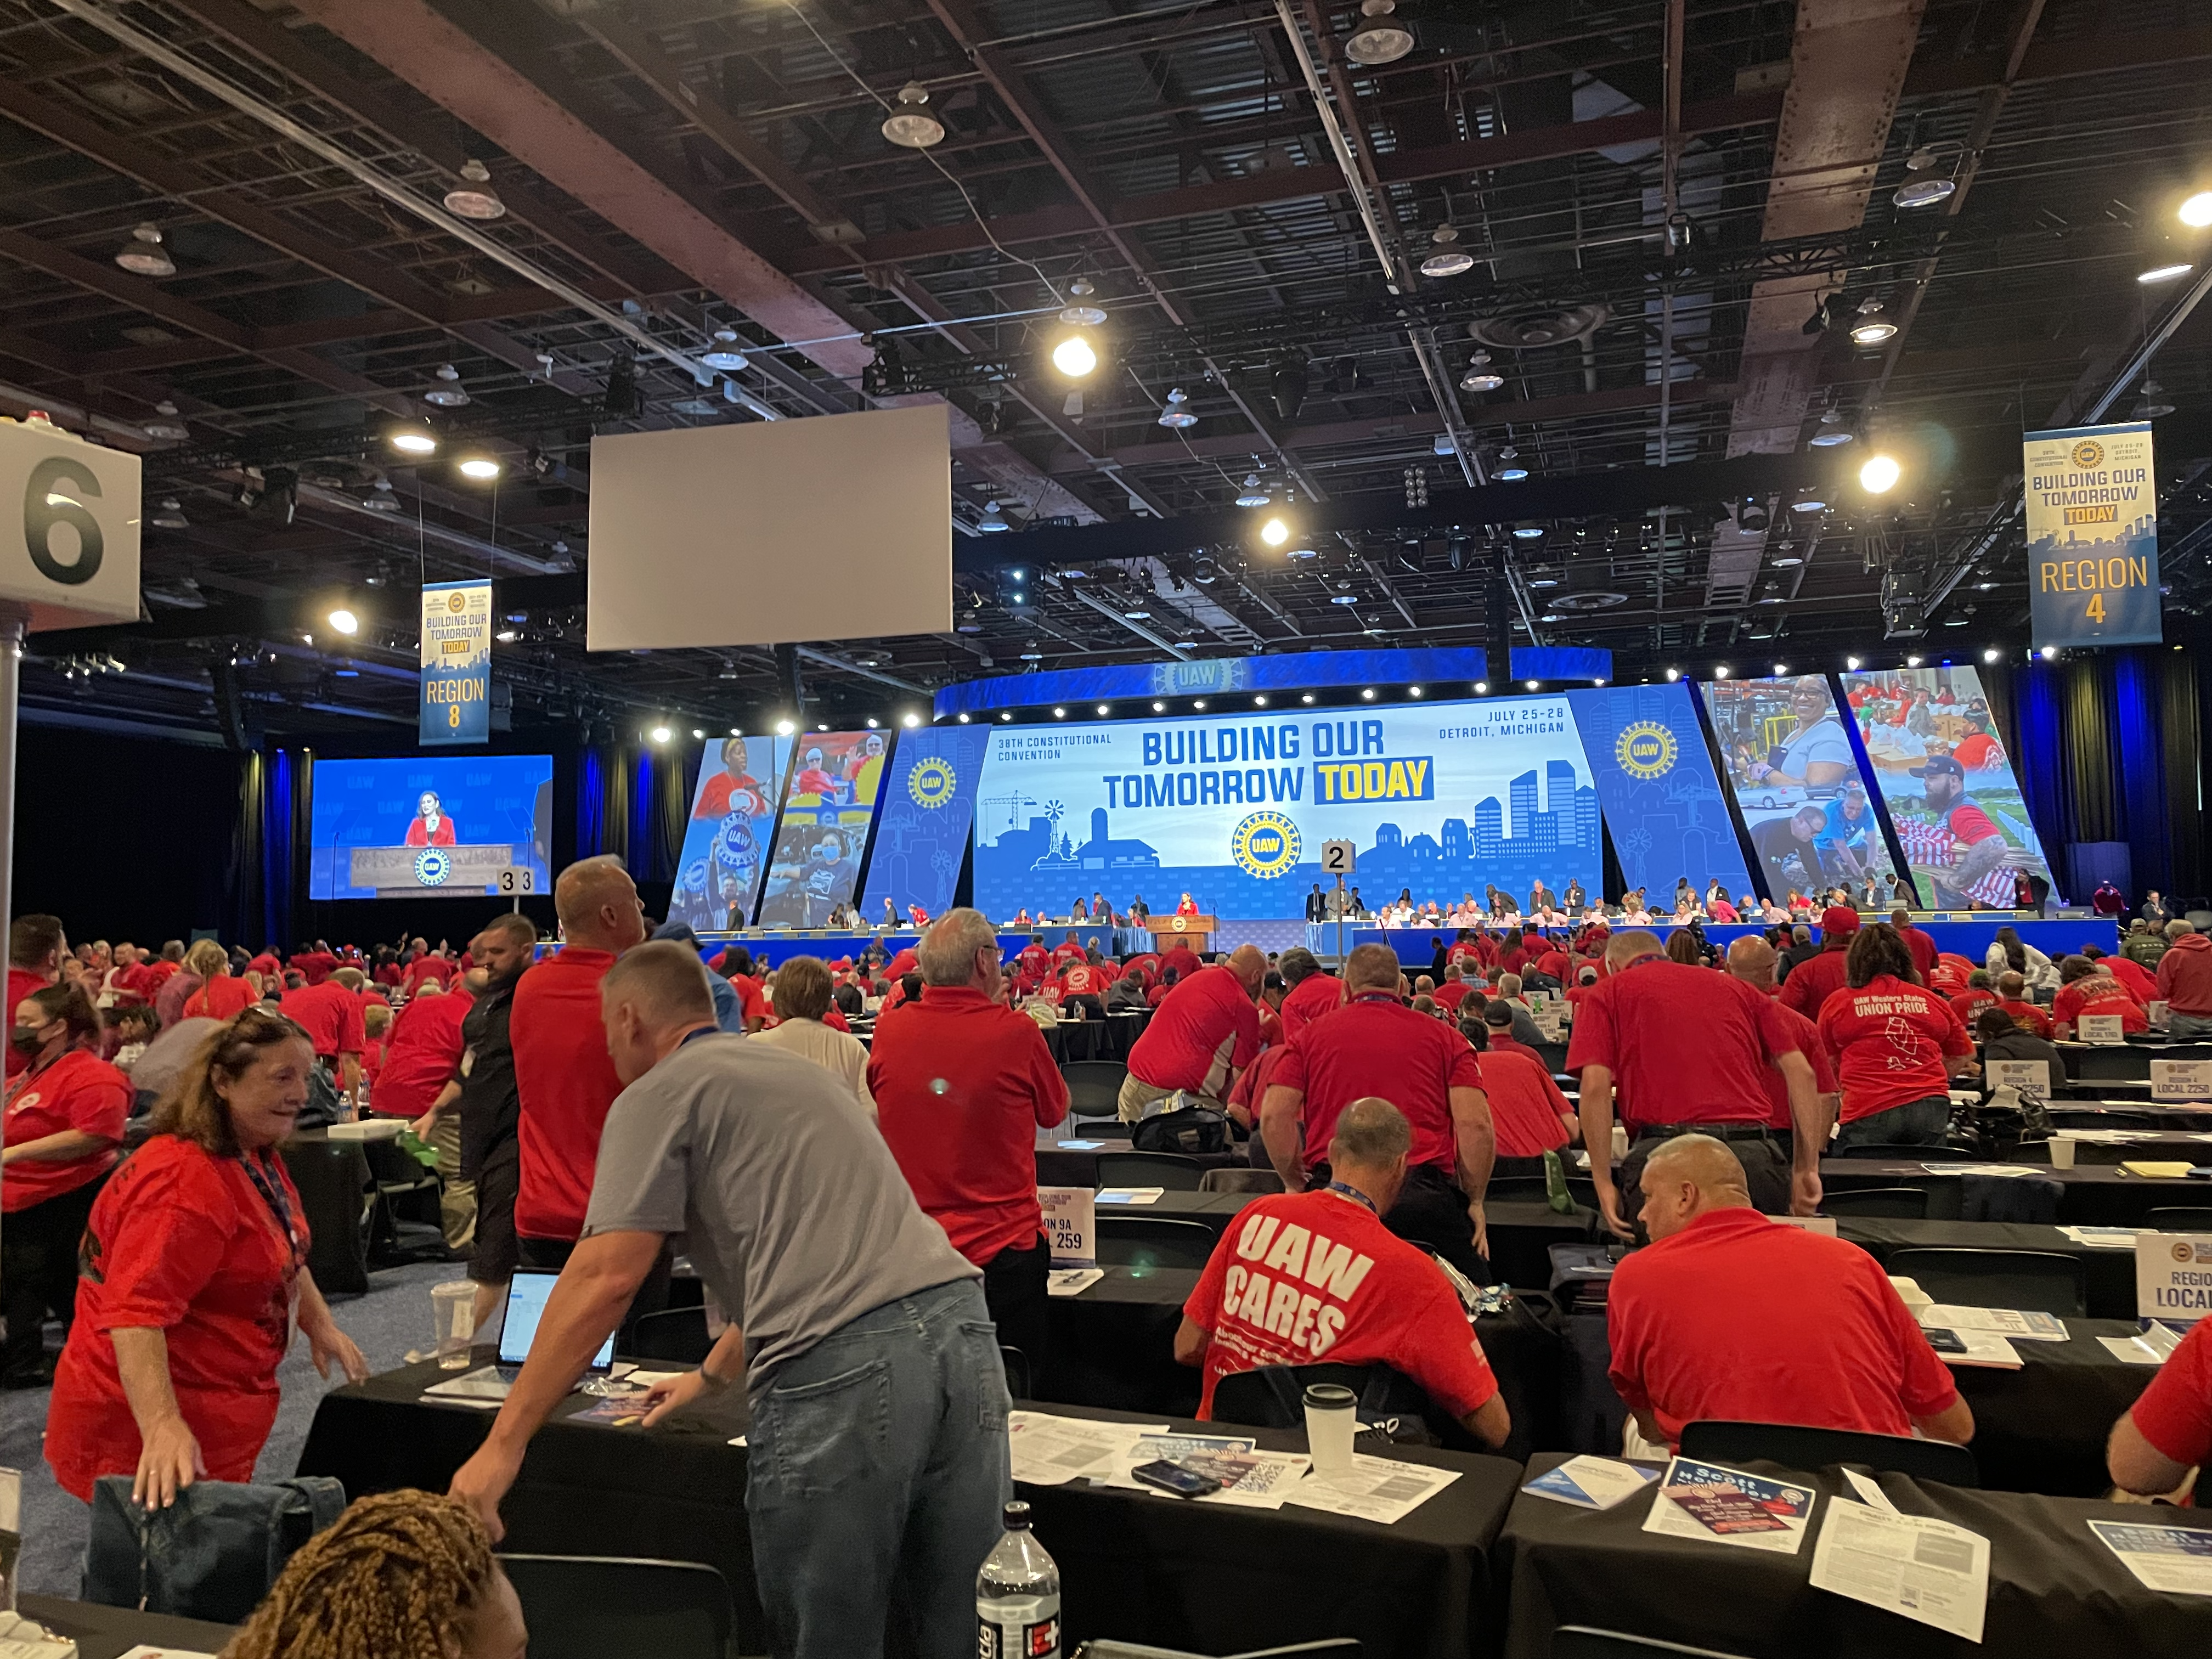 Picture of delegates in red shirts standing at convention.